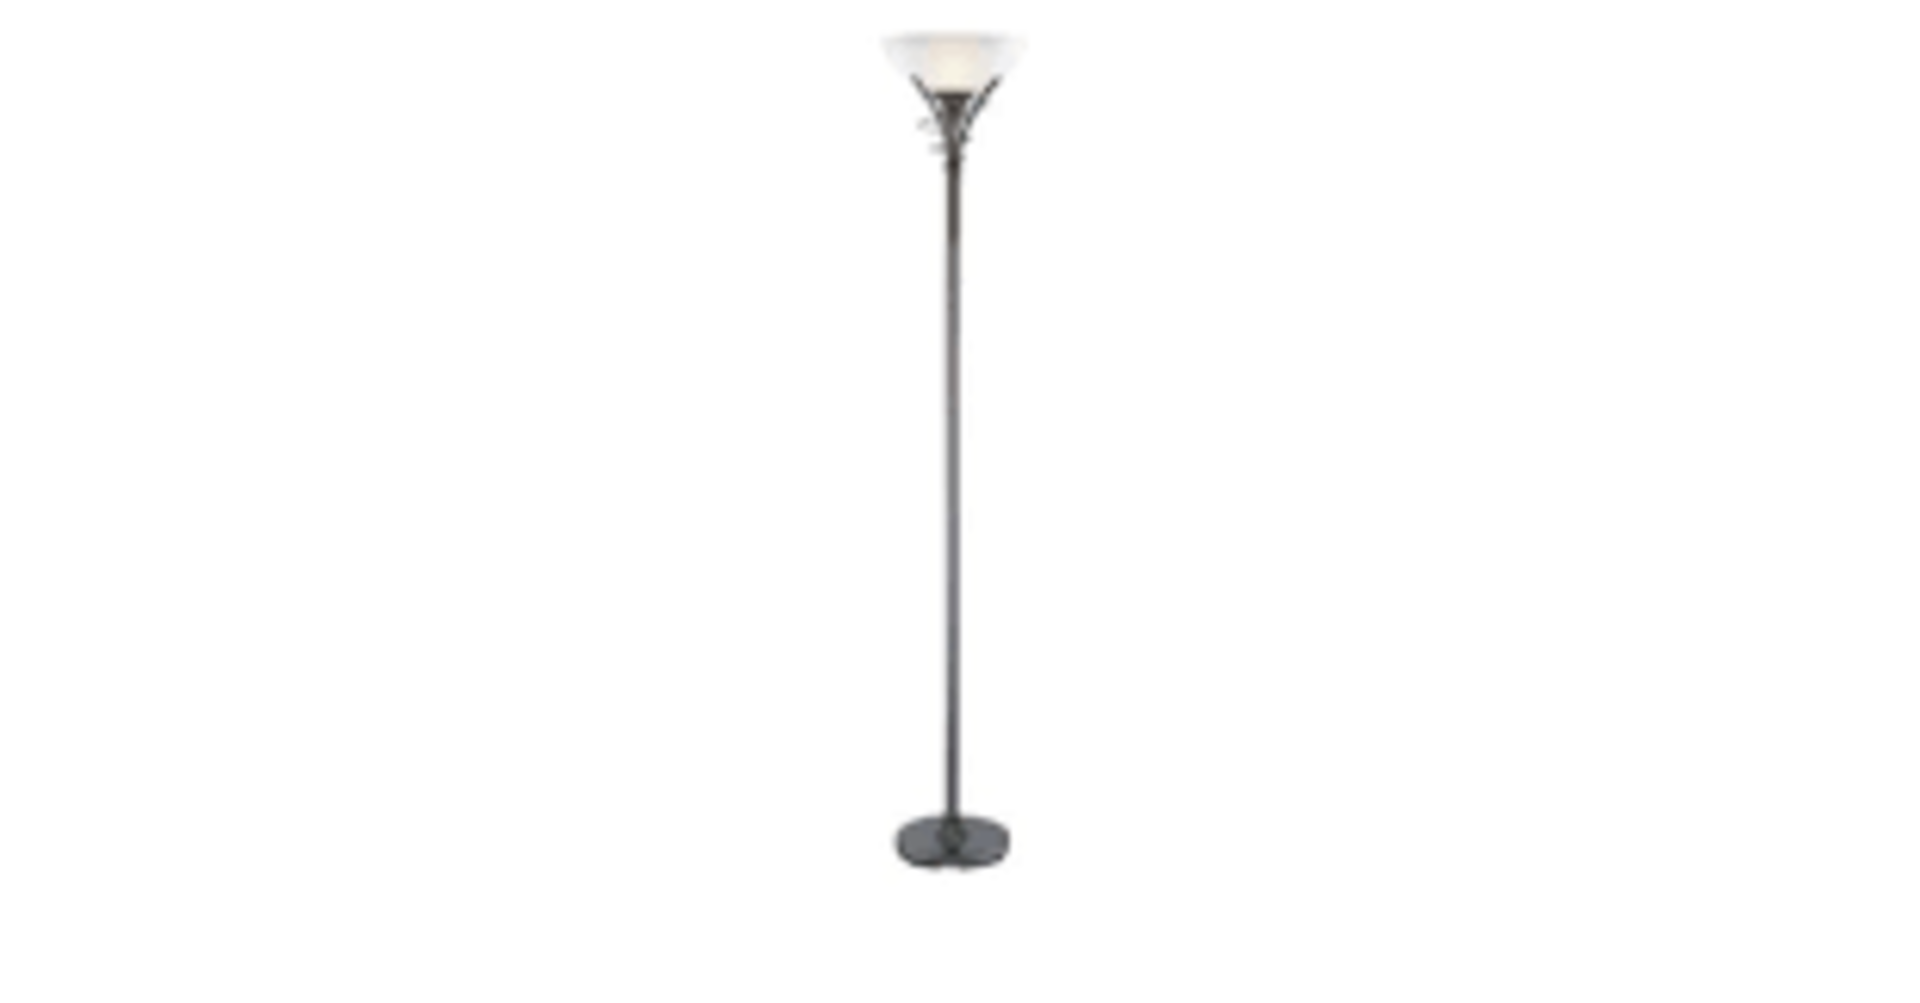 1 x Searchlight Linea Floor Lamp in black chrome - Ref: 5222BC - New and Boxed - RRP: £100.00 - Image 4 of 4